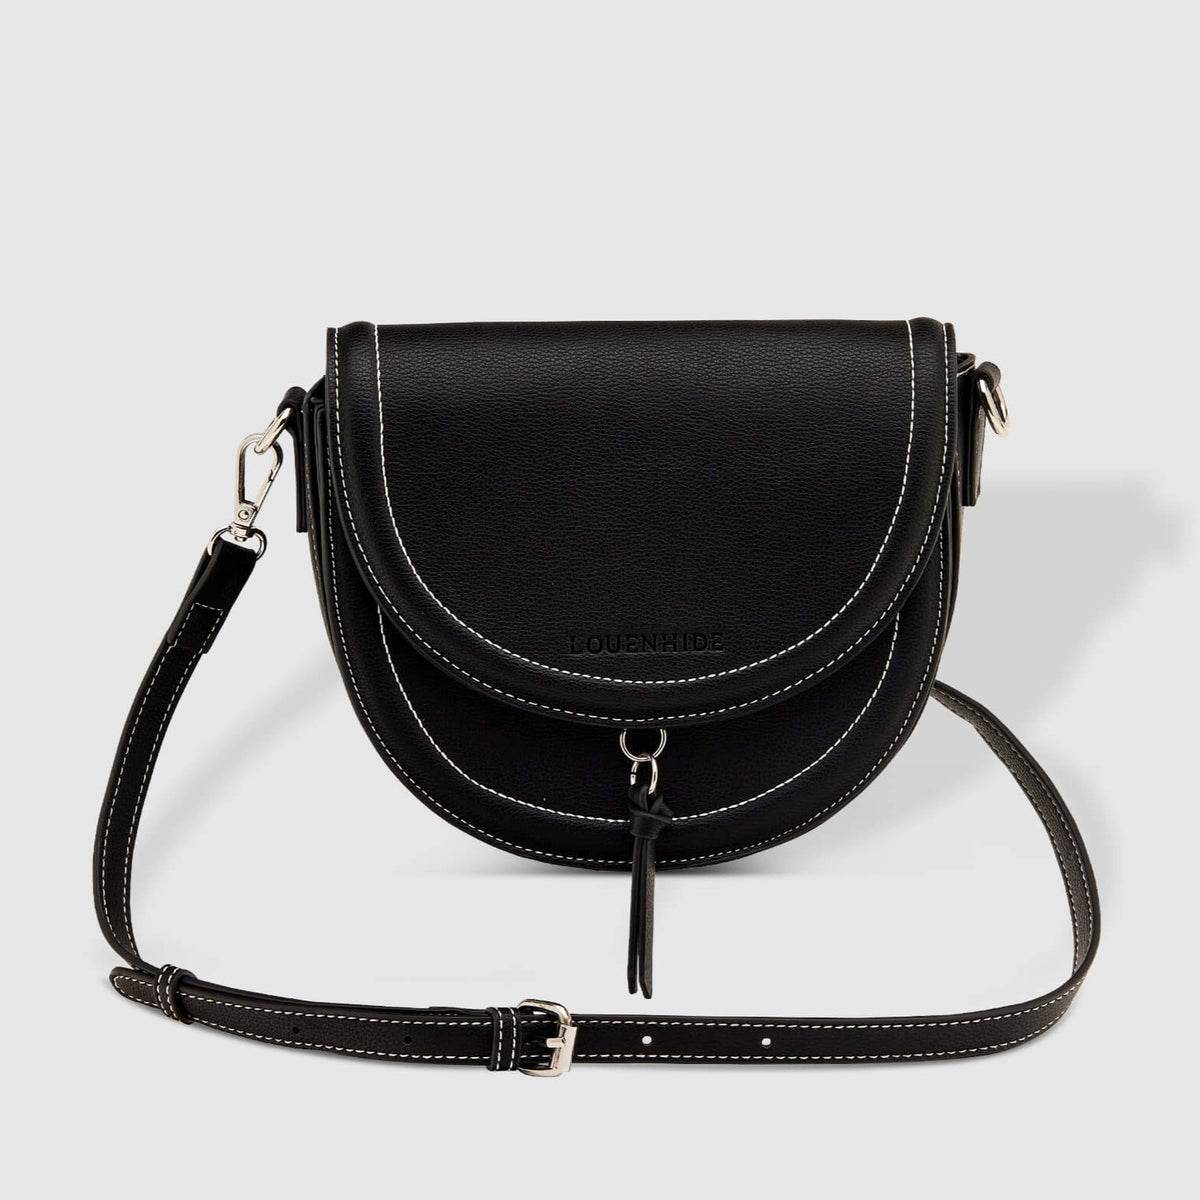 Louenhide Tully Crossbody - Simply Beautiful Jewelry Design & Clothing